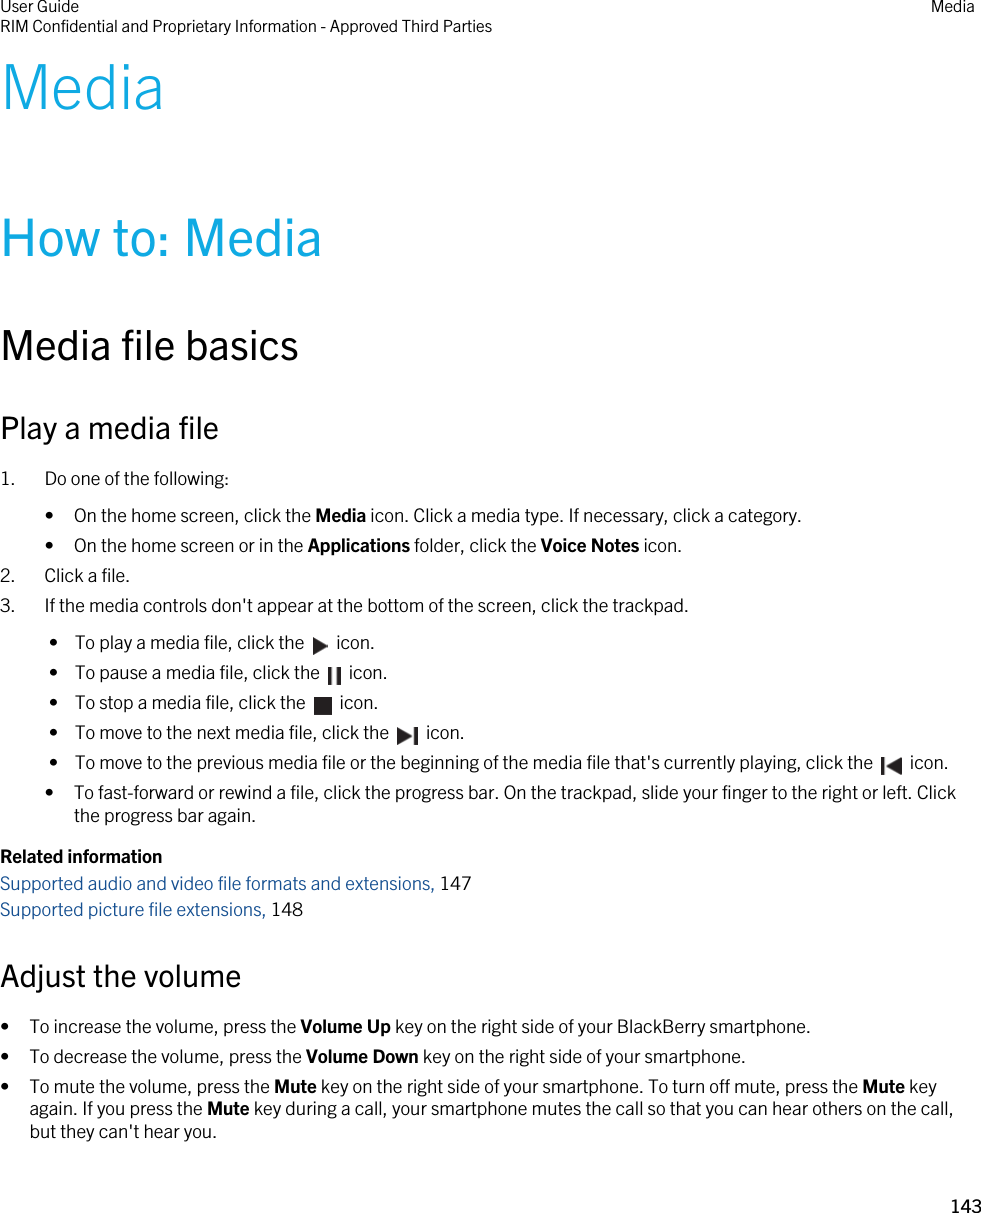 MediaHow to: MediaMedia file basicsPlay a media file1. Do one of the following:• On the home screen, click the Media icon. Click a media type. If necessary, click a category.• On the home screen or in the Applications folder, click the Voice Notes icon.2. Click a file.3. If the media controls don&apos;t appear at the bottom of the screen, click the trackpad. •  To play a media file, click the    icon. •  To pause a media file, click the    icon. •  To stop a media file, click the    icon. •  To move to the next media file, click the    icon. •  To move to the previous media file or the beginning of the media file that&apos;s currently playing, click the    icon.• To fast-forward or rewind a file, click the progress bar. On the trackpad, slide your finger to the right or left. Click the progress bar again.Related informationSupported audio and video file formats and extensions, 147Supported picture file extensions, 148Adjust the volume• To increase the volume, press the Volume Up key on the right side of your BlackBerry smartphone.• To decrease the volume, press the Volume Down key on the right side of your smartphone.• To mute the volume, press the Mute key on the right side of your smartphone. To turn off mute, press the Mute key again. If you press the Mute key during a call, your smartphone mutes the call so that you can hear others on the call, but they can&apos;t hear you.User GuideRIM Confidential and Proprietary Information - Approved Third Parties Media143 